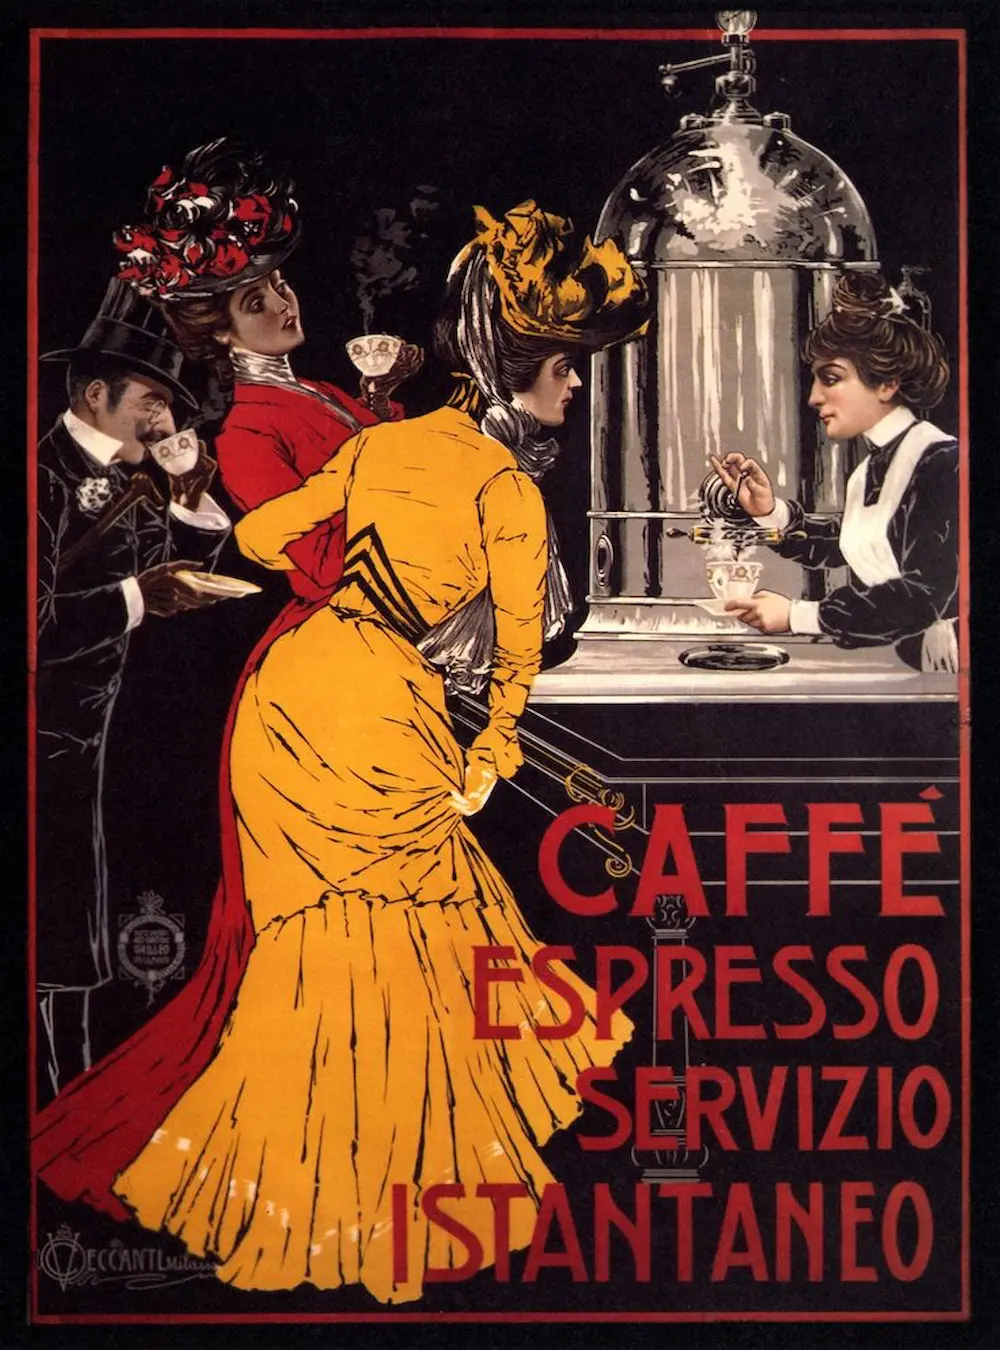 Vintage poster of ladies surrounding a mobile cocktail bar and bartender making cocktails for guests